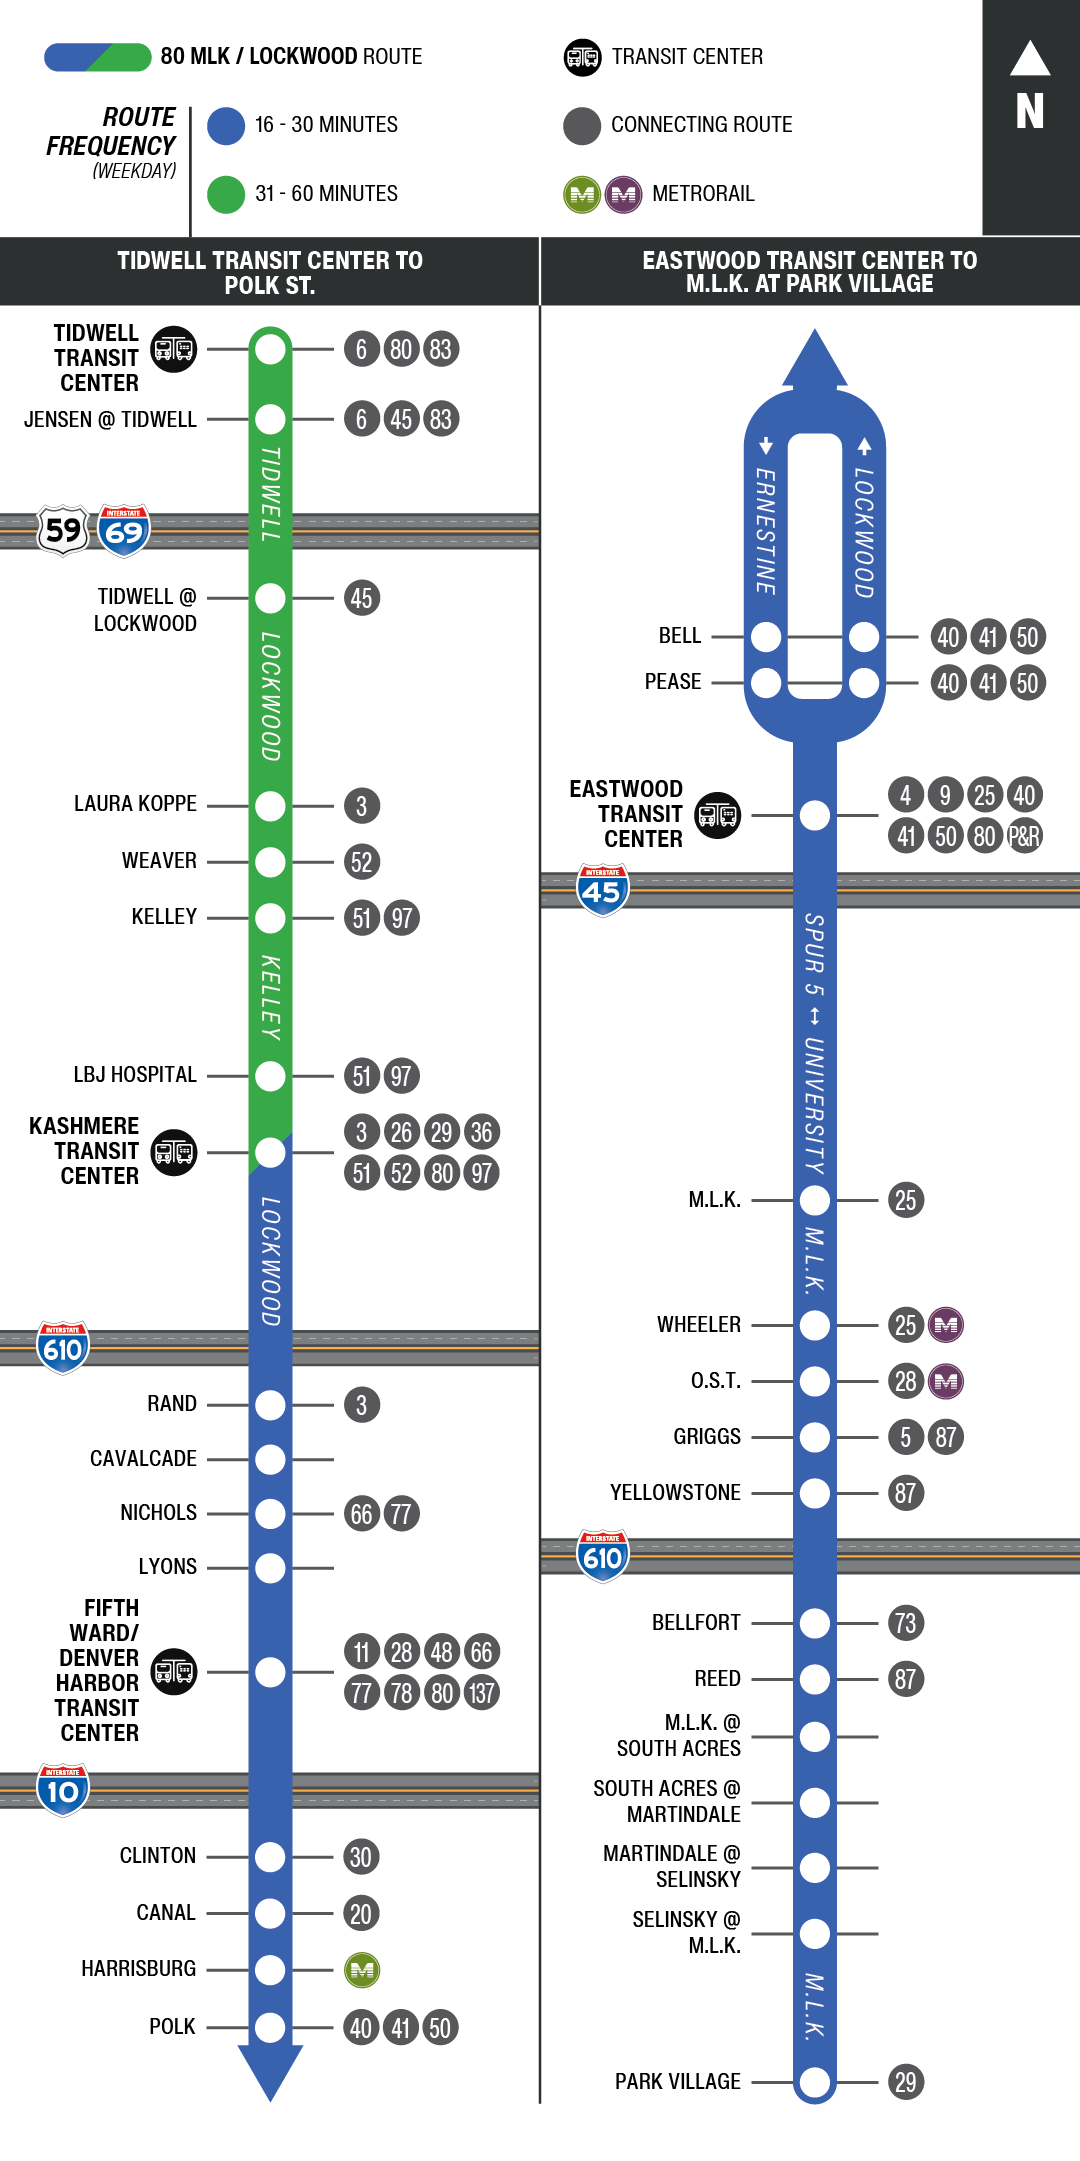 Route map for 80 MLK / Lockwood bus